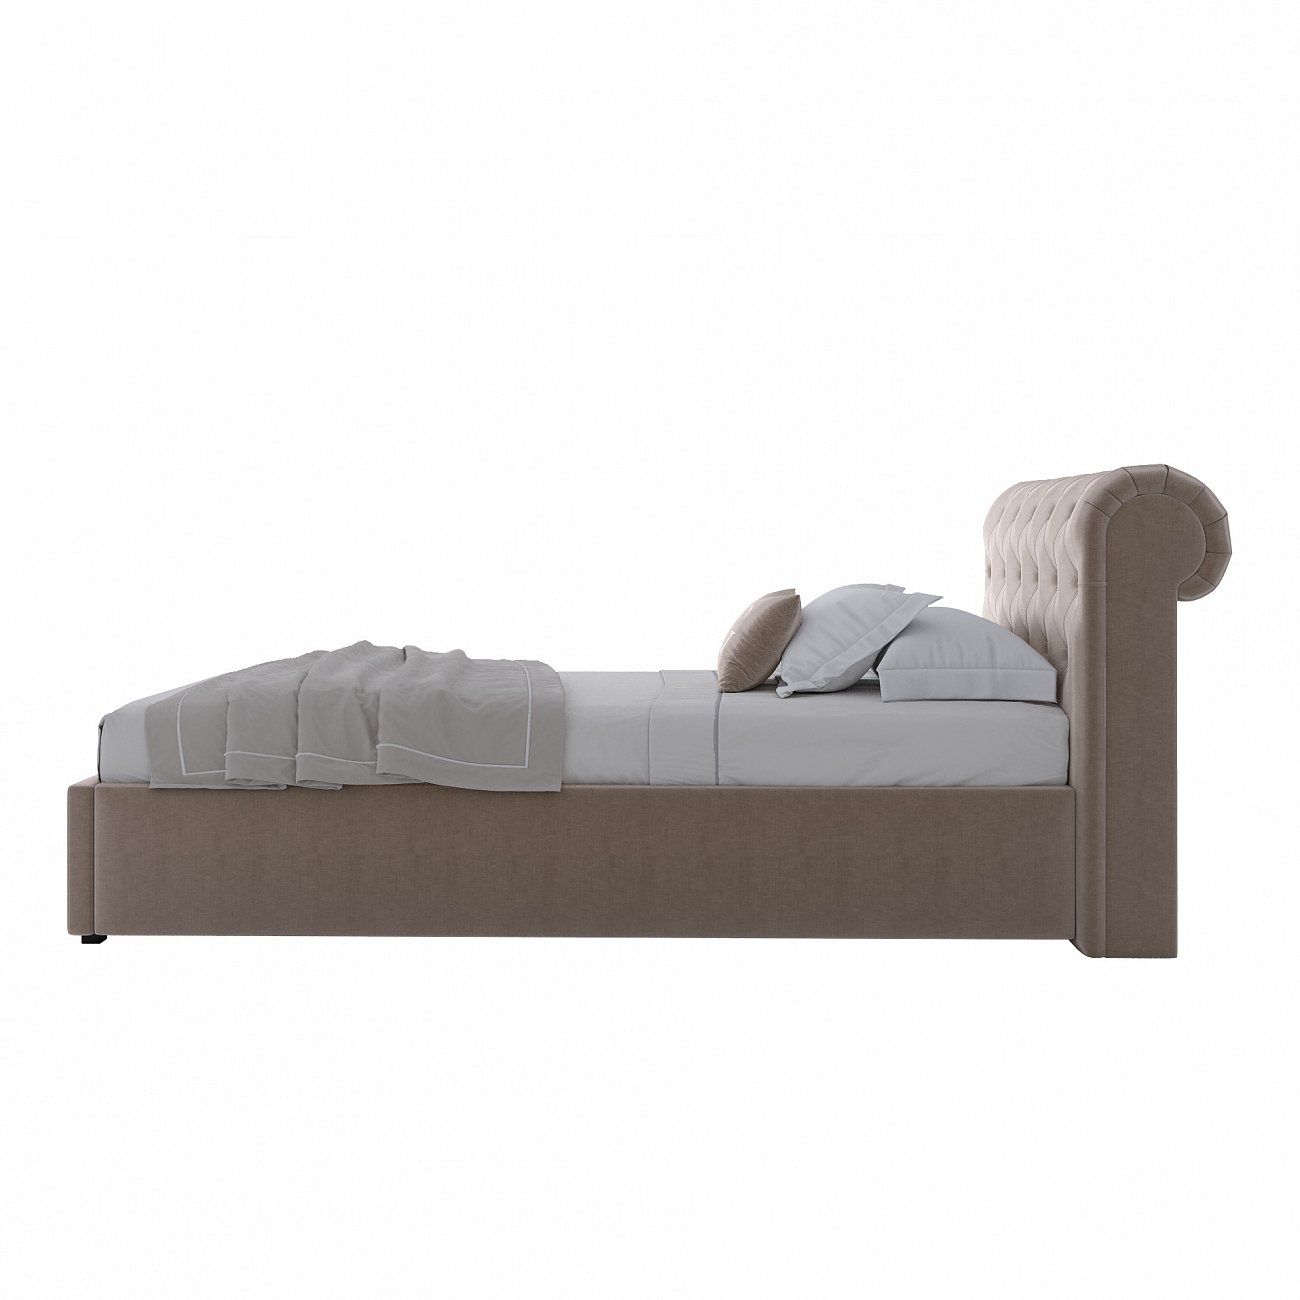 Single bed with upholstered headboard 90x200 cm beige Sweet Dreams